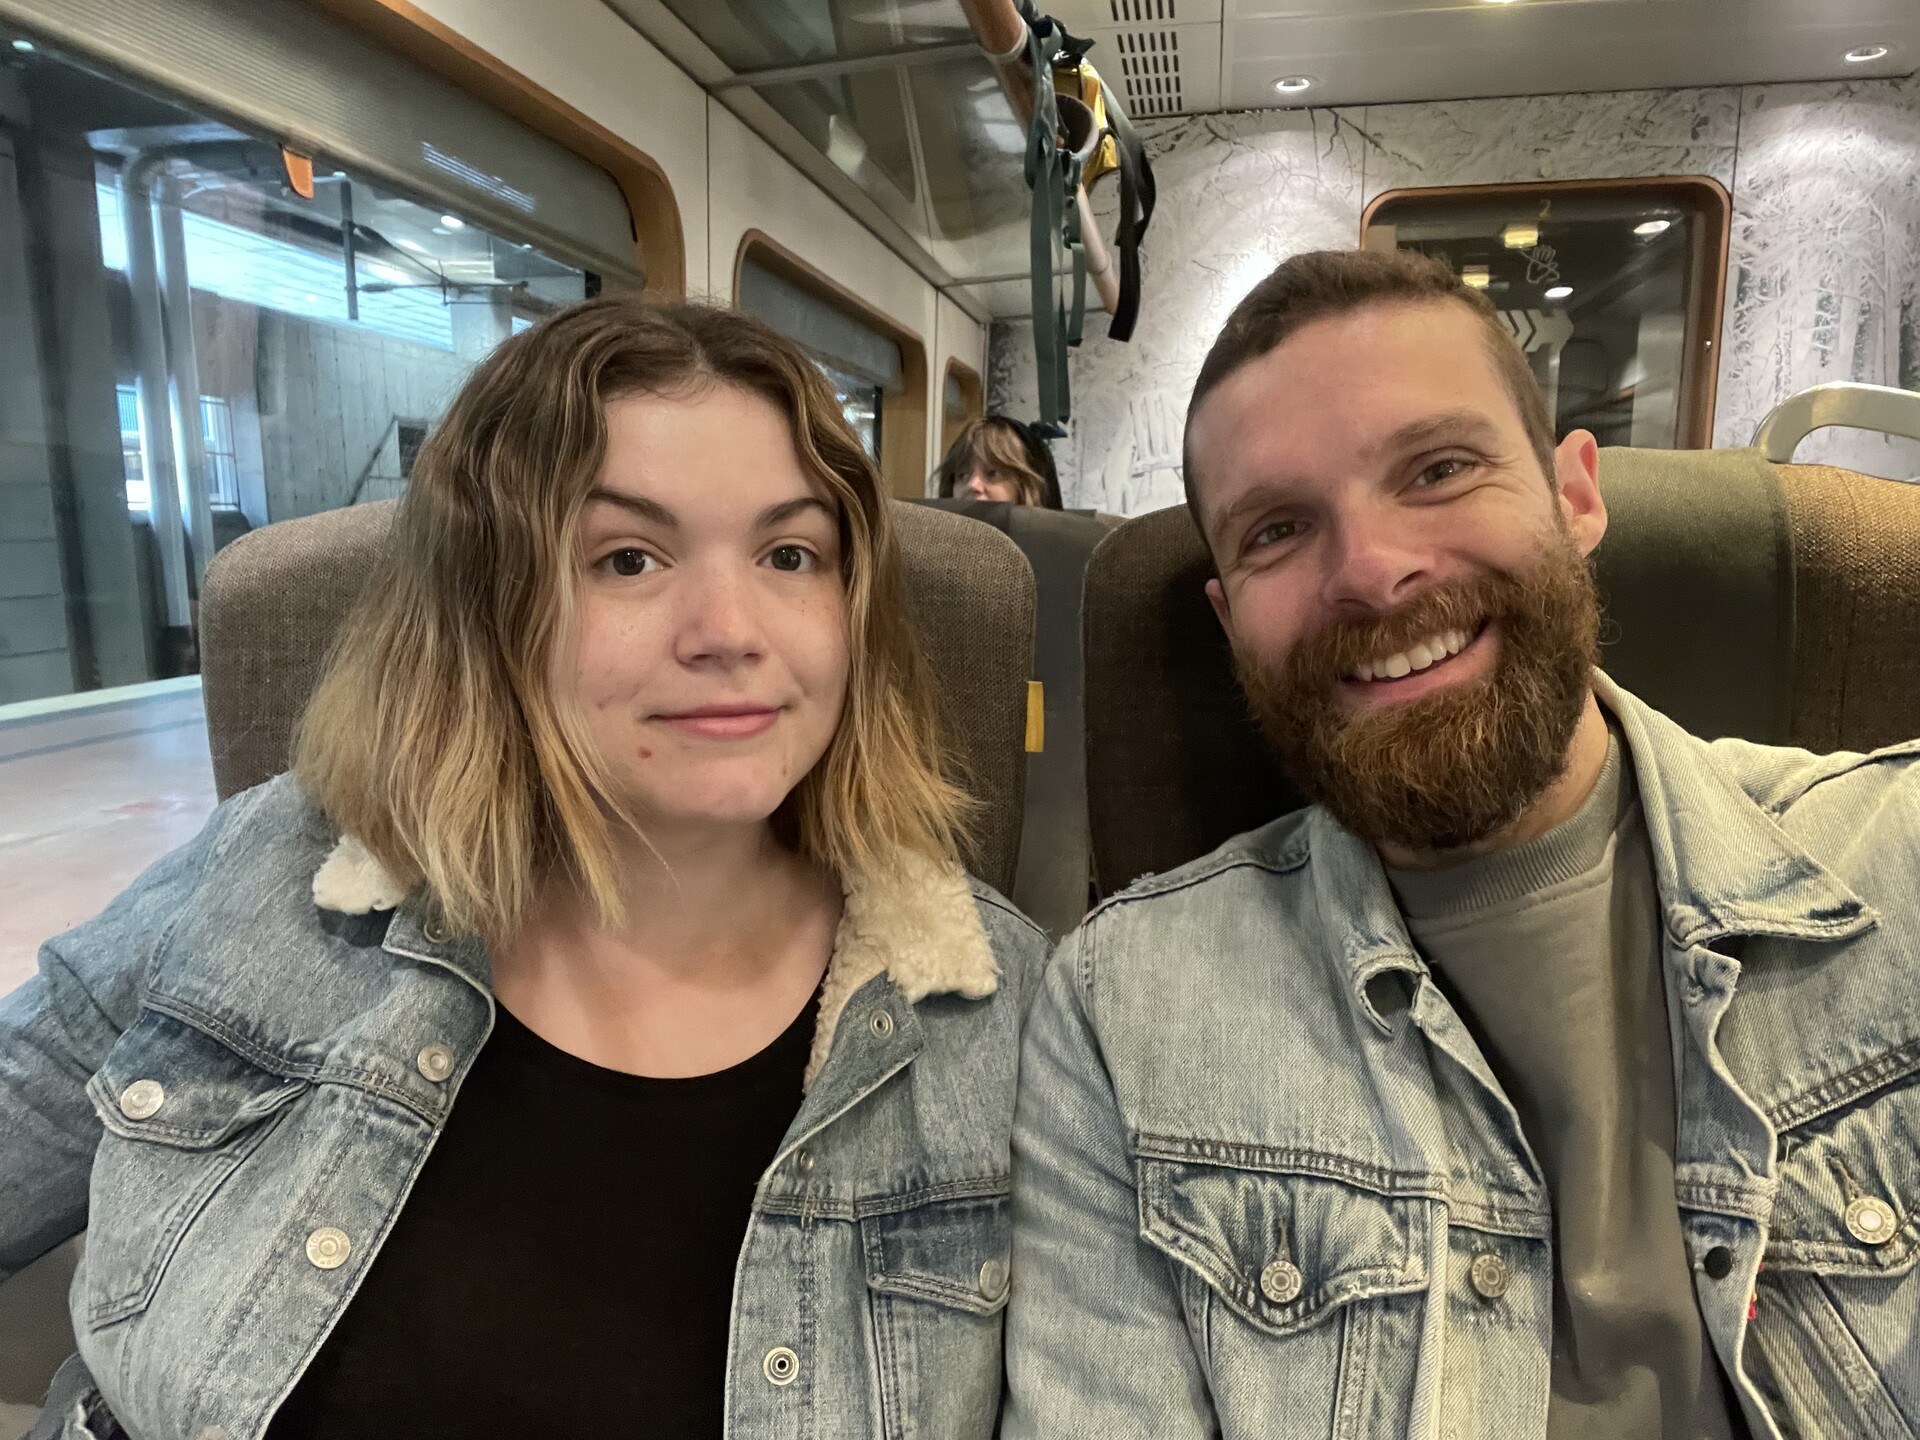 Sam and I smiling in our seats on the Arlanda Express train back to the airport